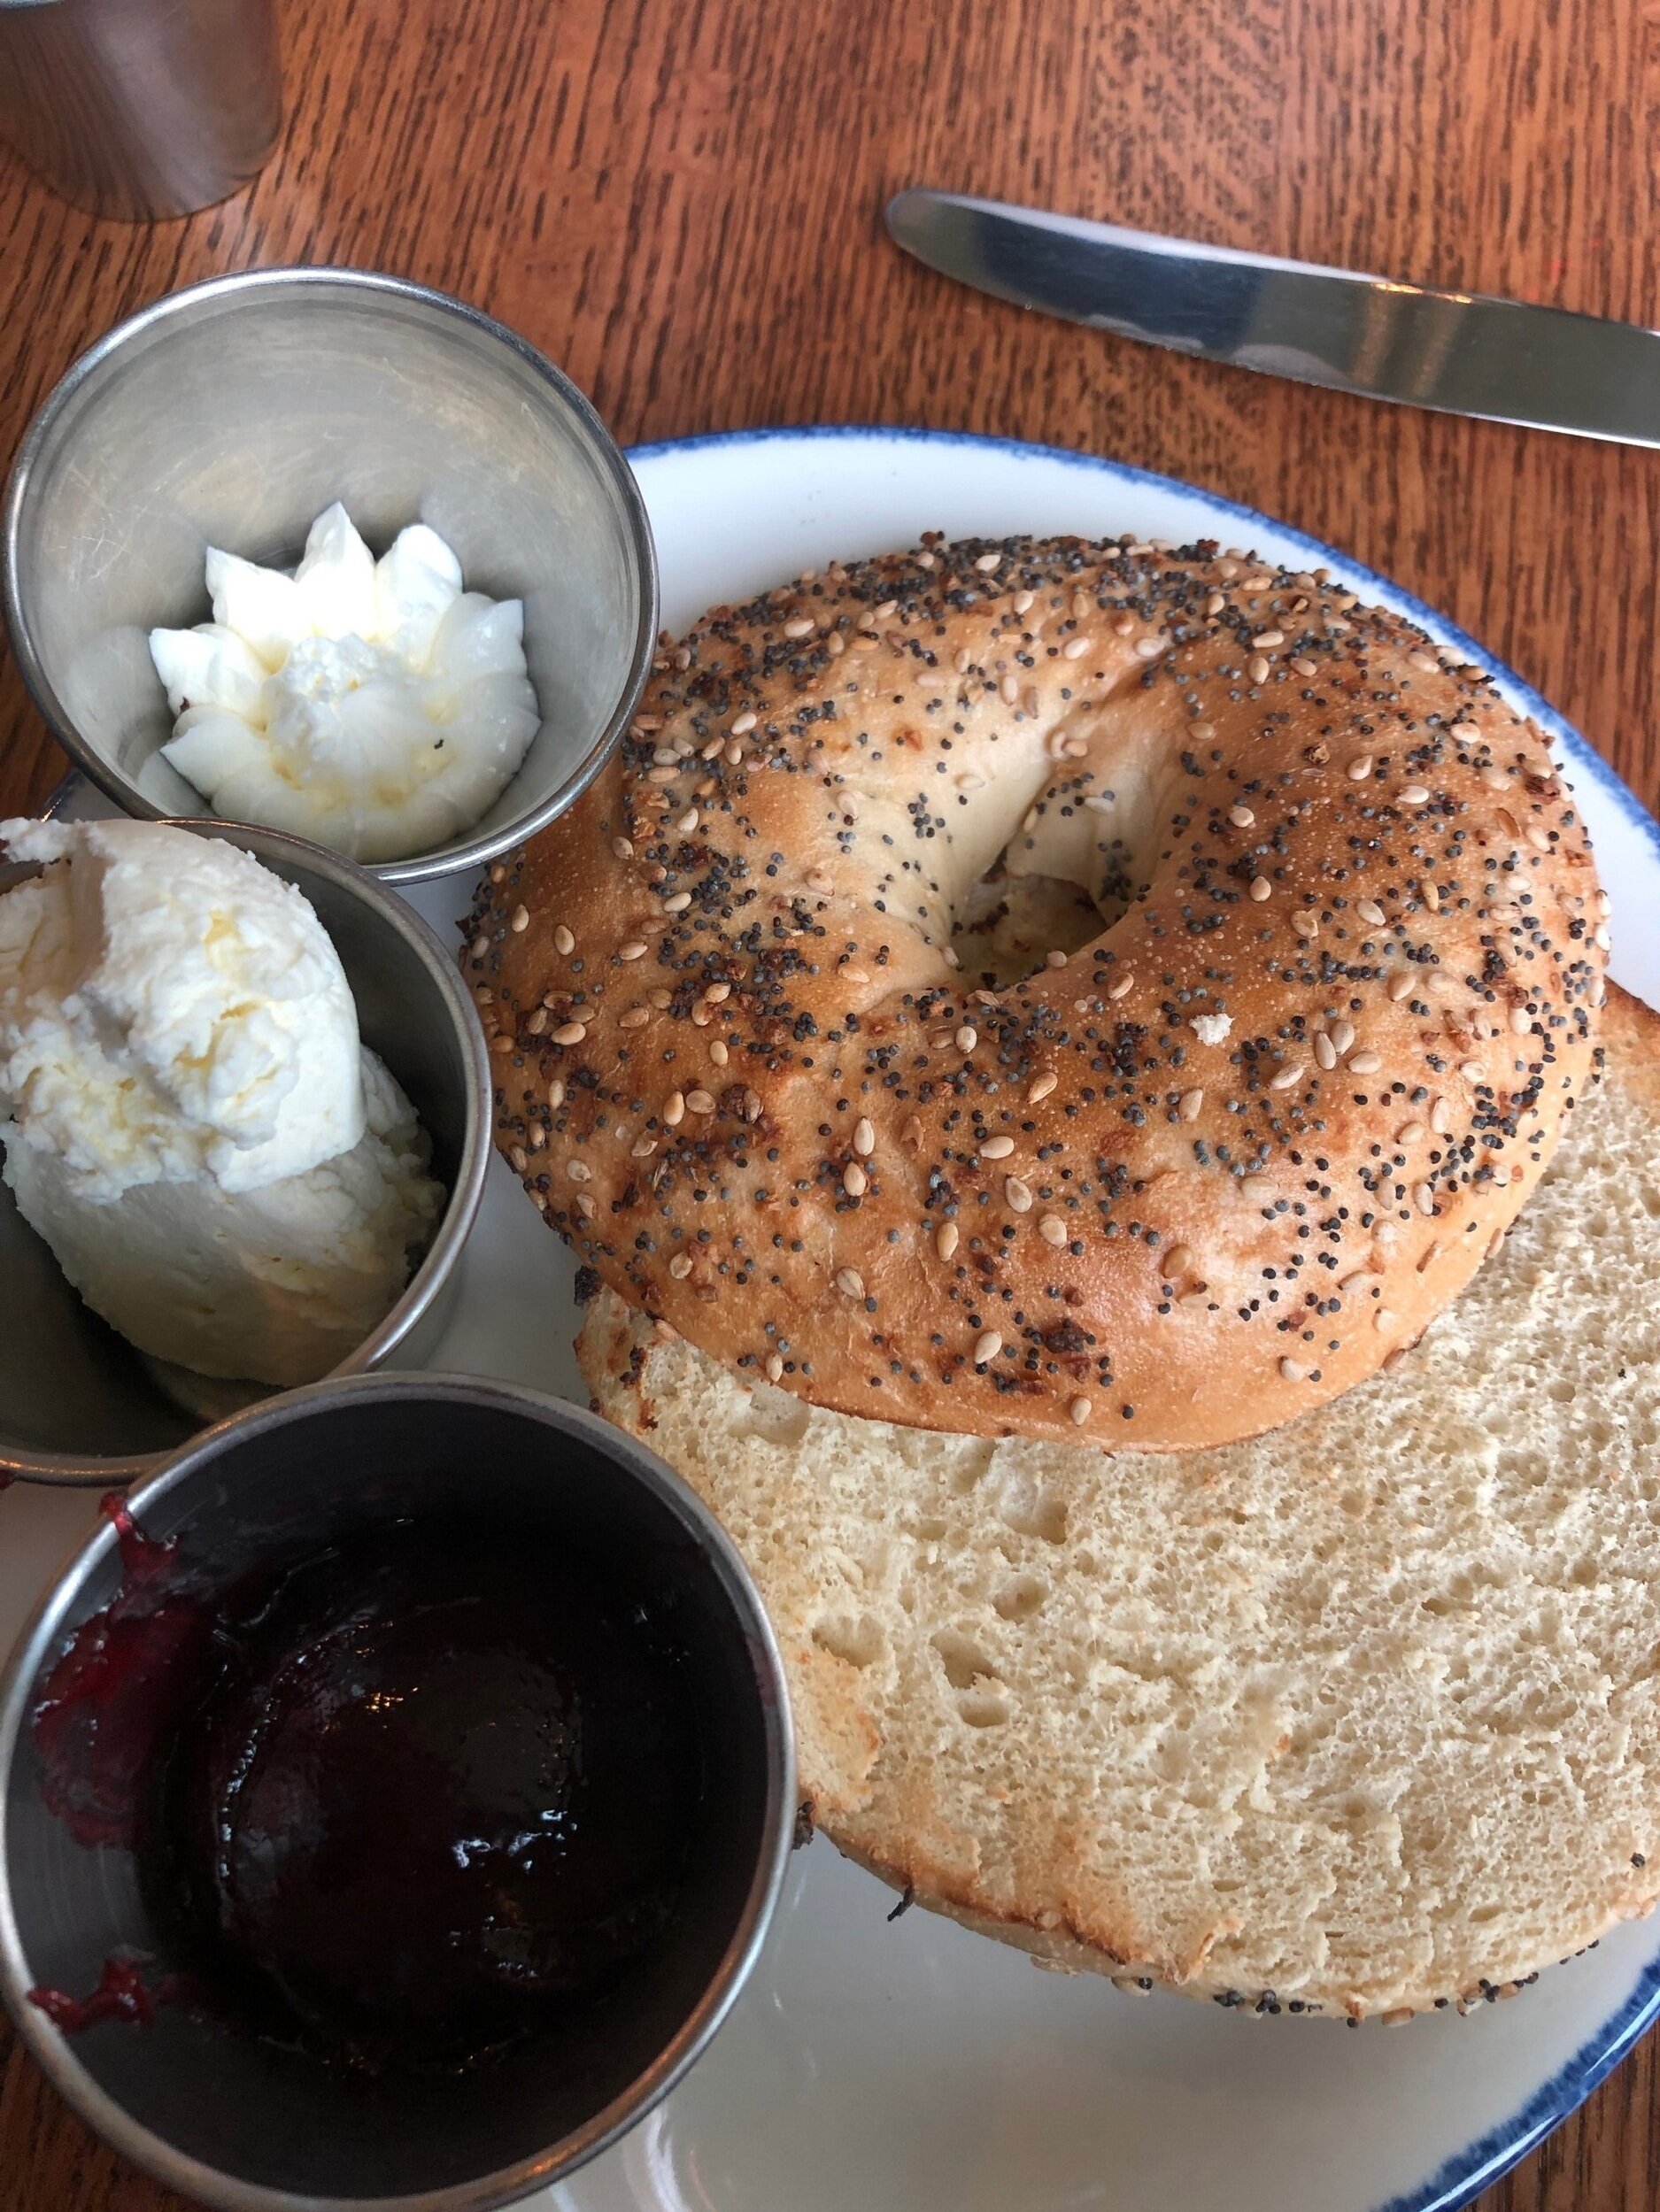 I ordered a bagel. This simple little bagel was the best I’ve had in years.